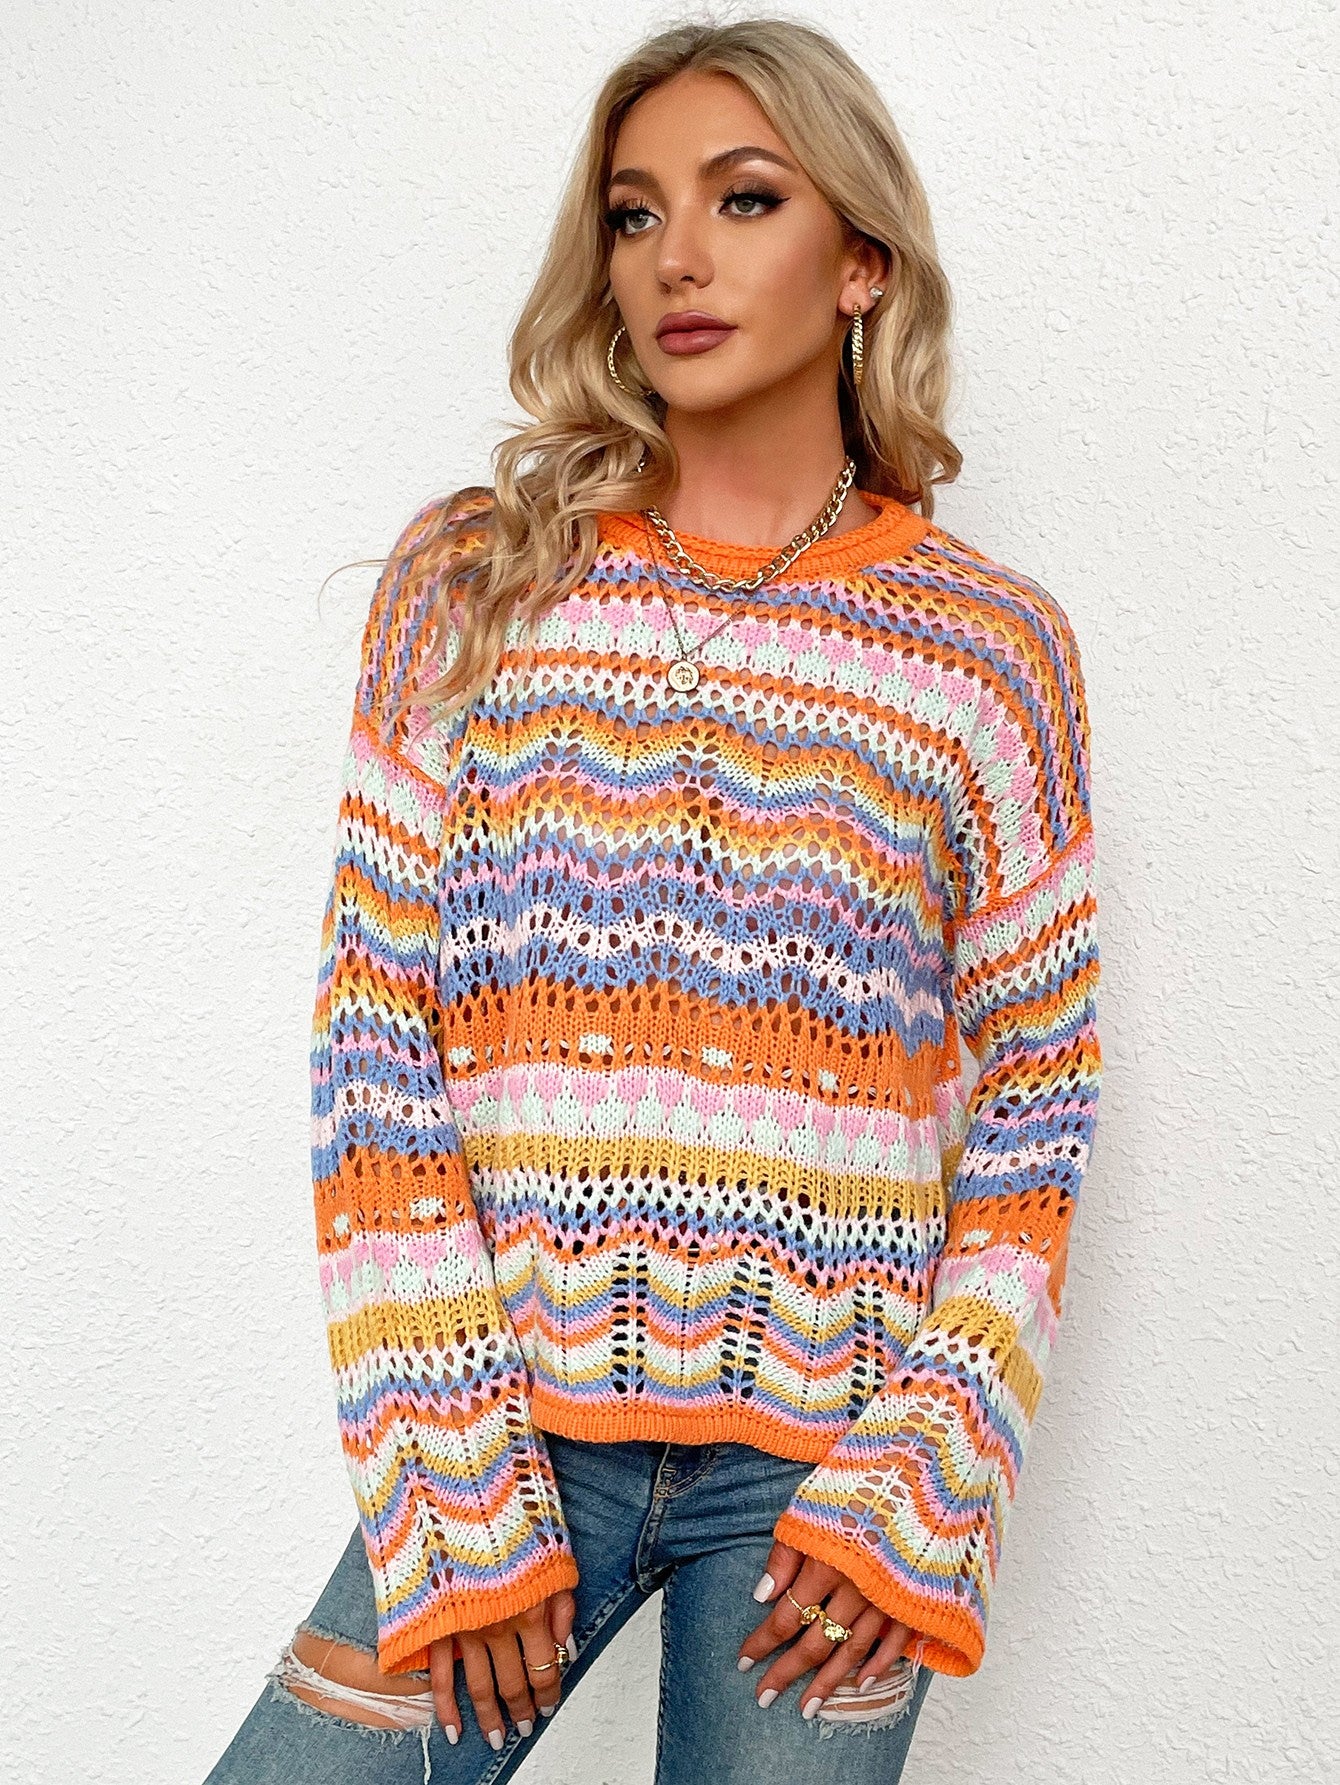 Rainbow Stripe Openwork Flare Sleeve Knit Top  | KIKI COUTURE-Women's Clothing, Designer Fashions, Shoes, Bags